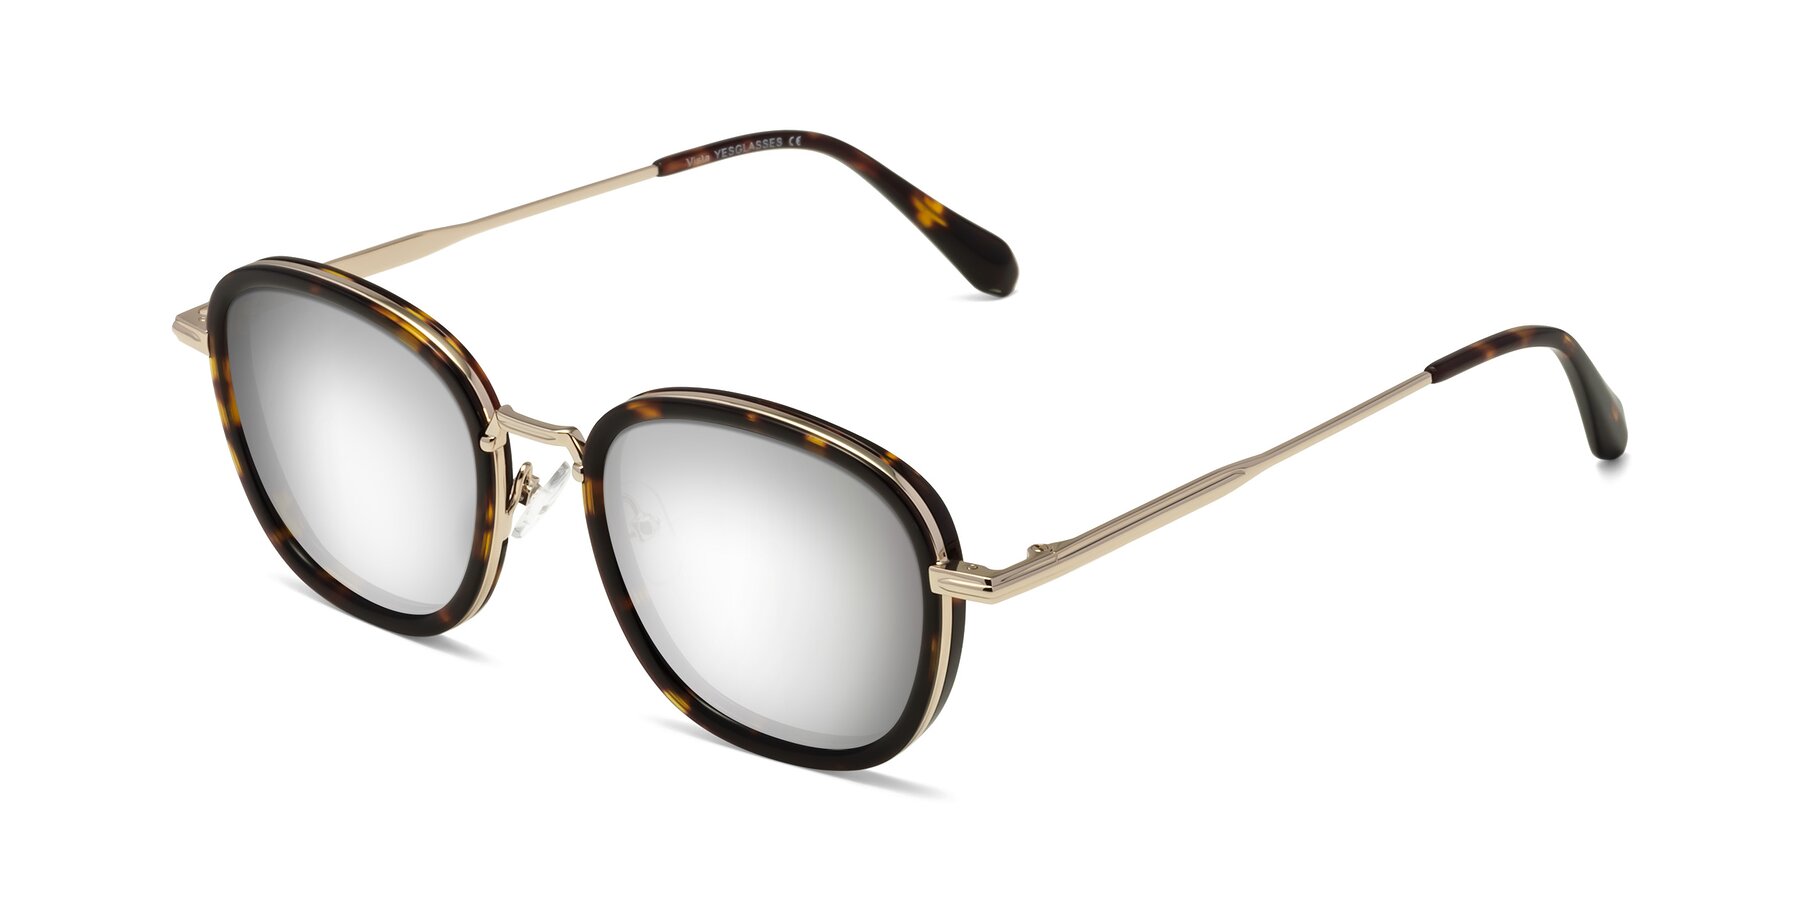 Angle of Vista in Tortoise-Light Gold with Silver Mirrored Lenses